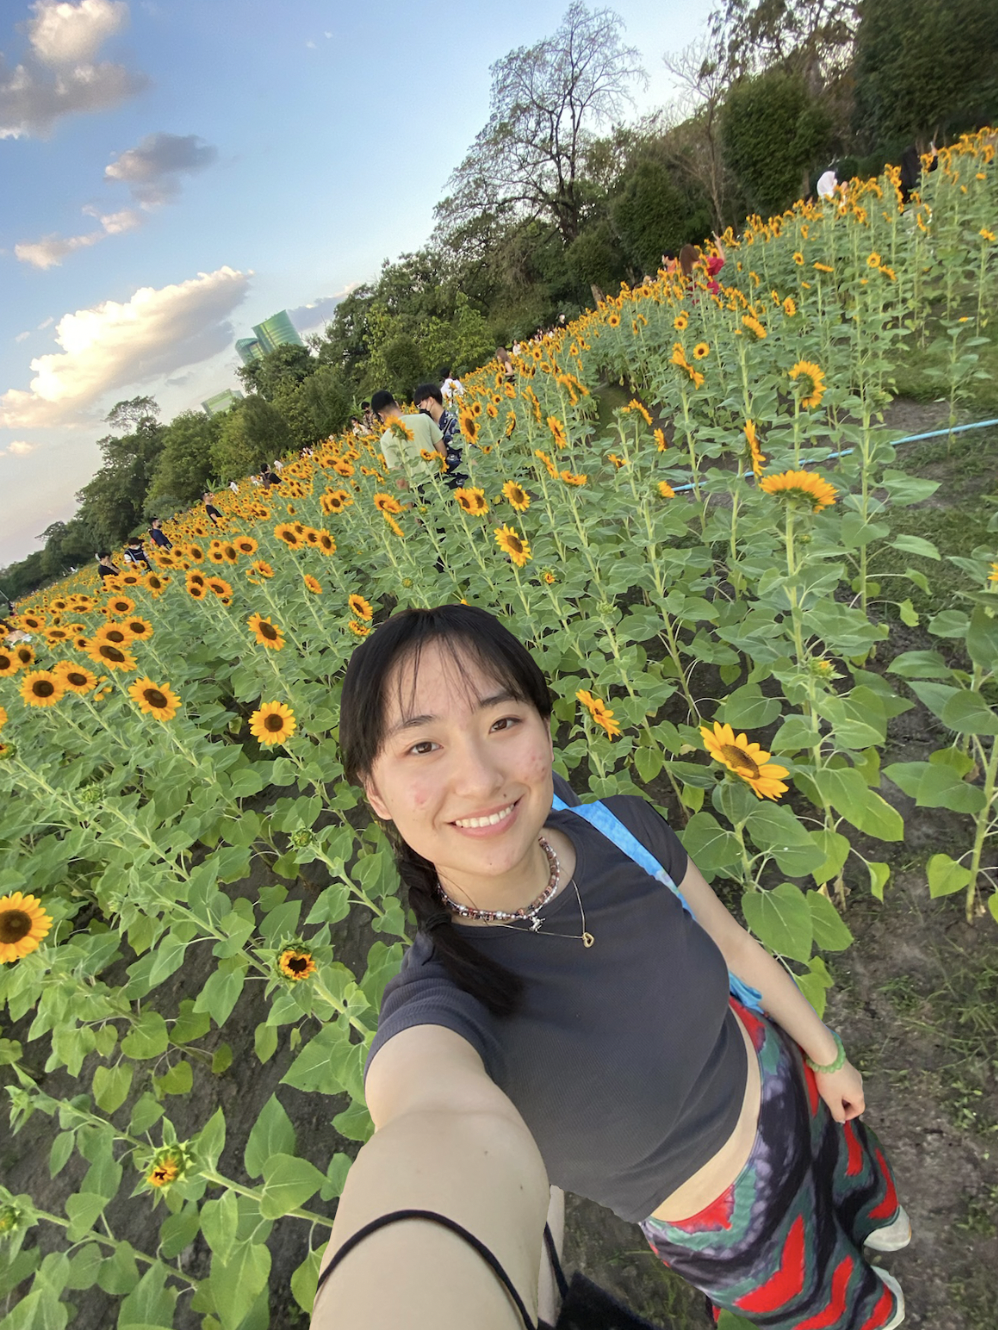 Portrait of Selina Wu smiling in a field of sunflowers.